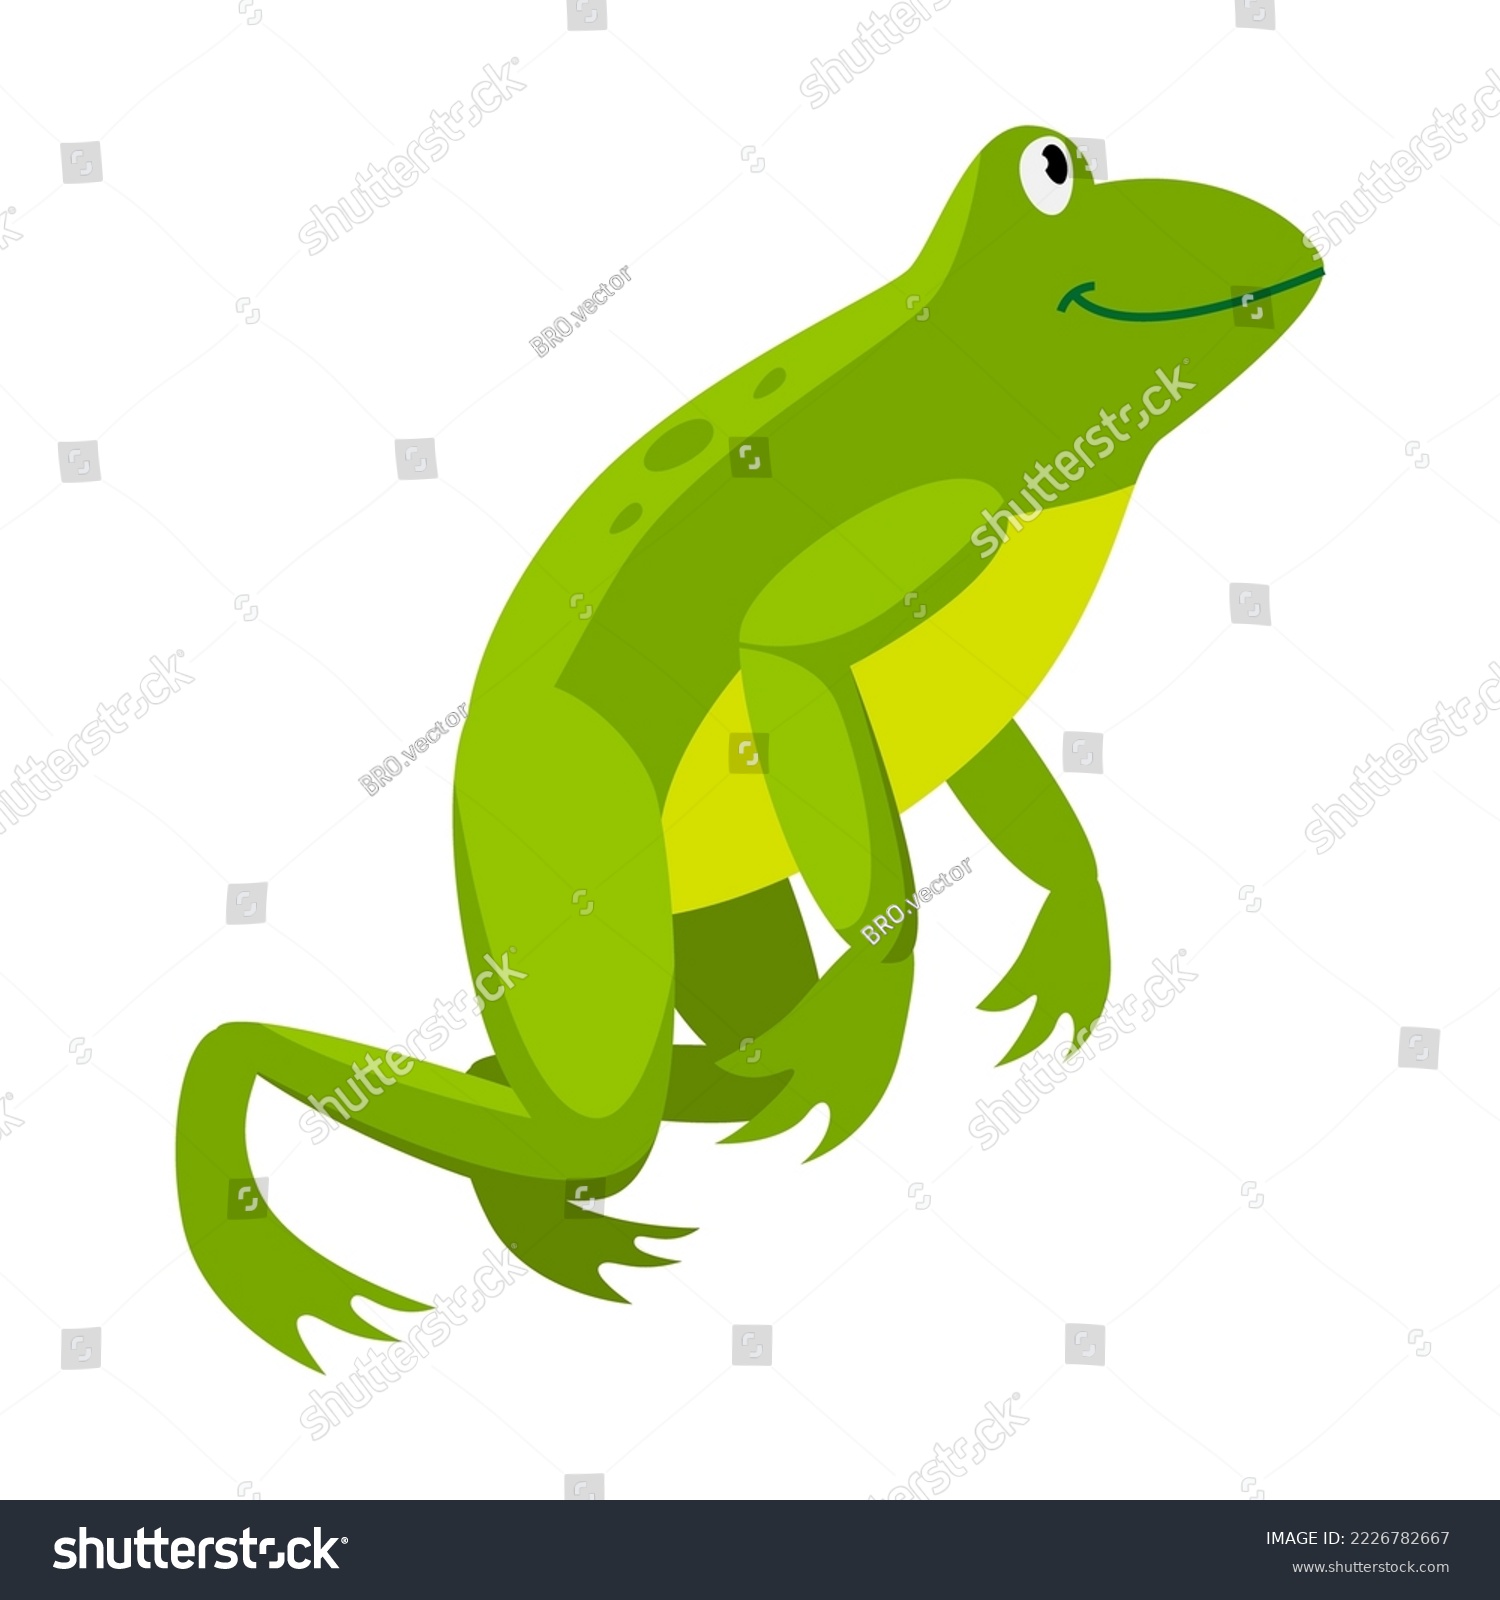 SVG of Green frog bouncing in place. Cartoon vector illustration. Leaping toad on white background. Funny water animal. Nature, movement, amphibia, reptile, fauna concept for design svg